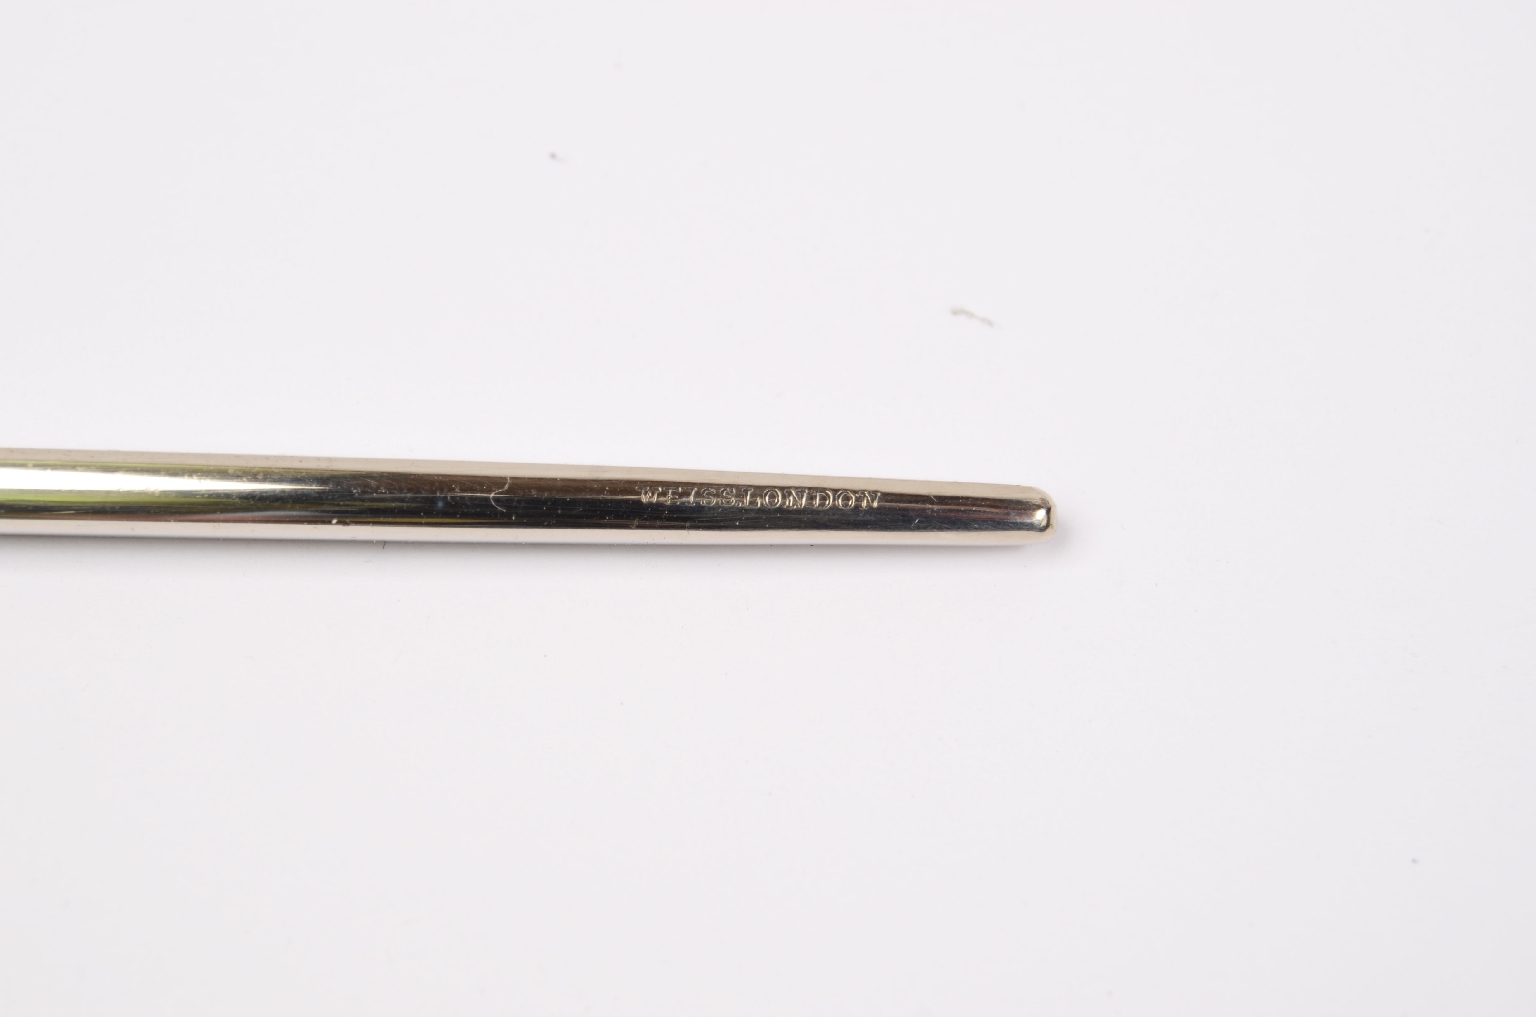 e-shop-old-medical-instruments-code-7184-ophthalmic-steel-surgery